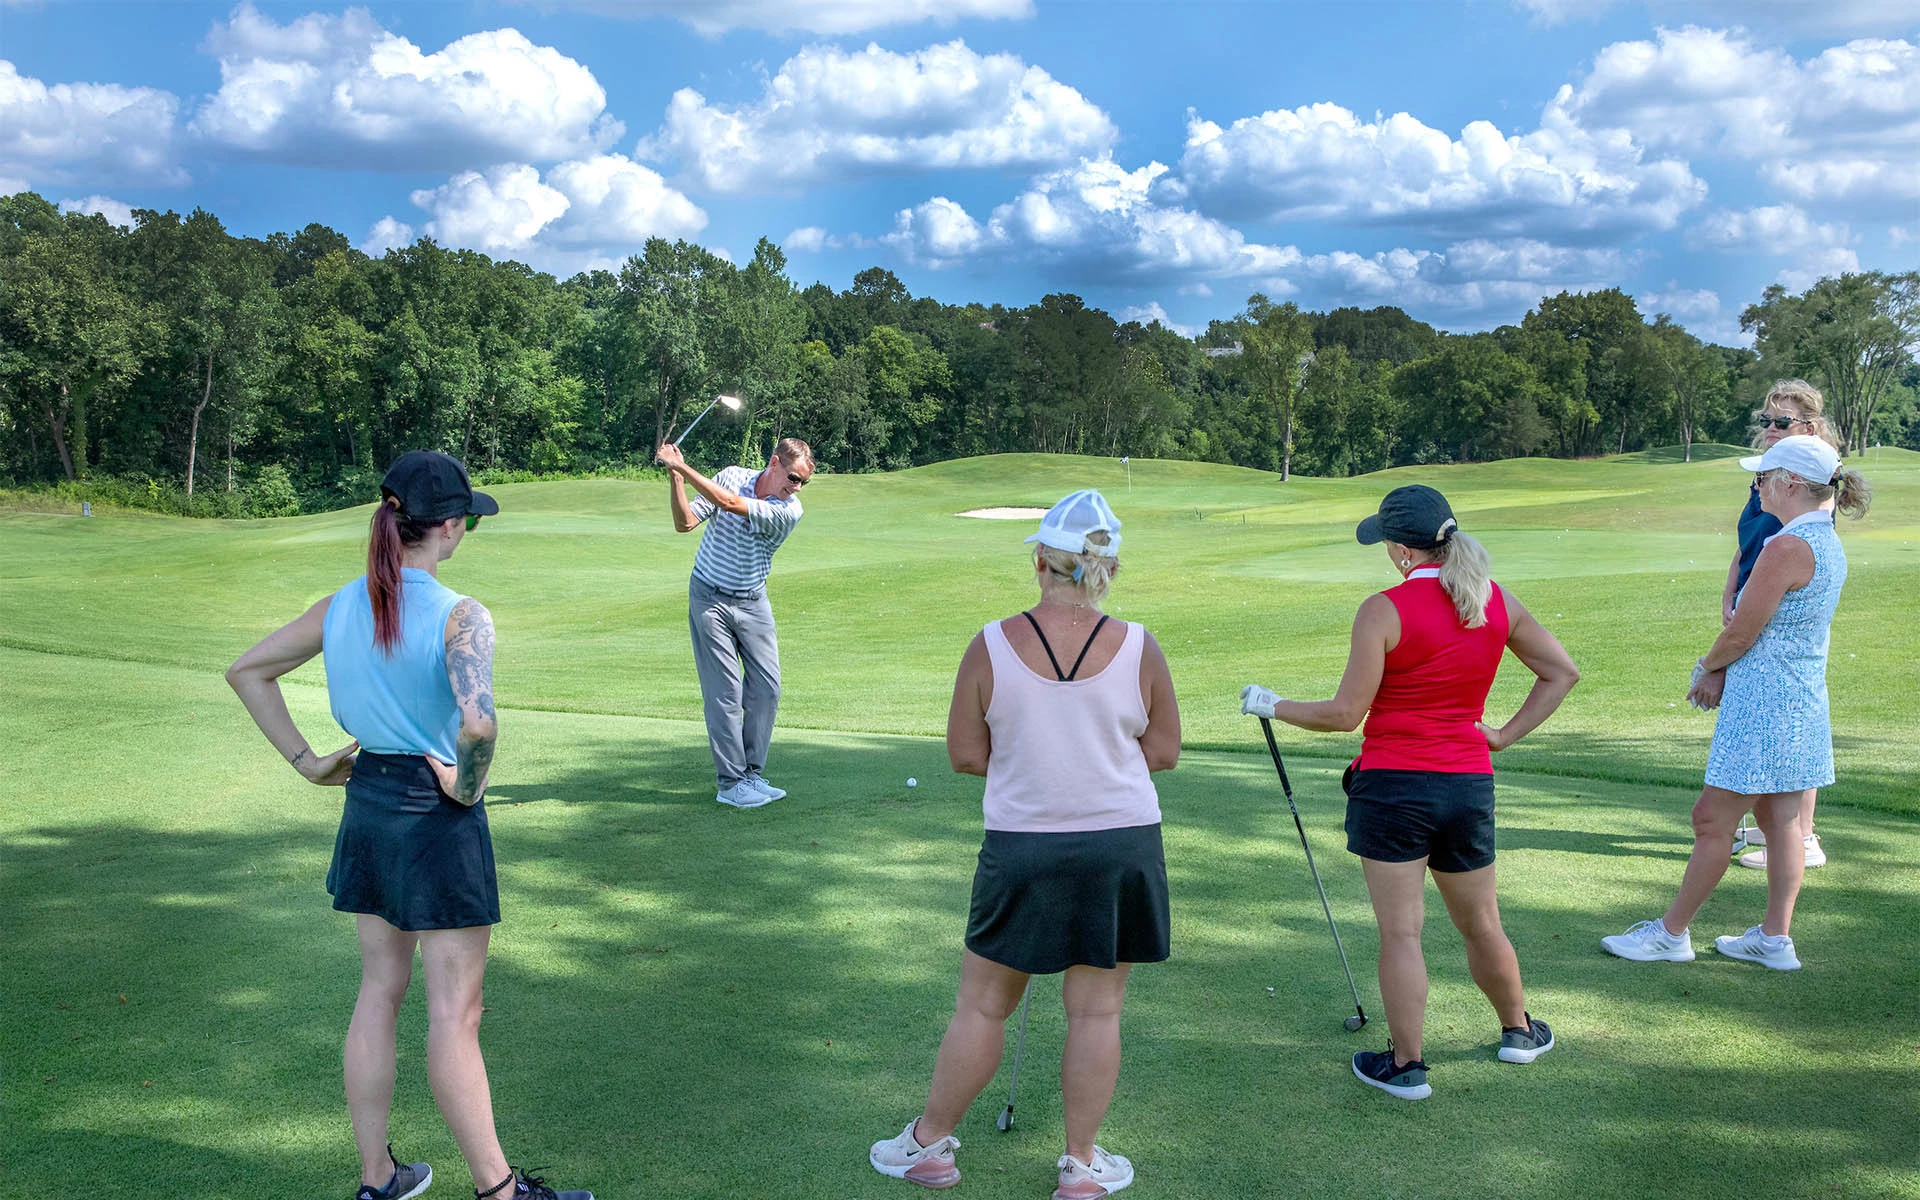 A PGA-Certified teaching pro providing a clinic to adult members of an Invited Club on the driving range.